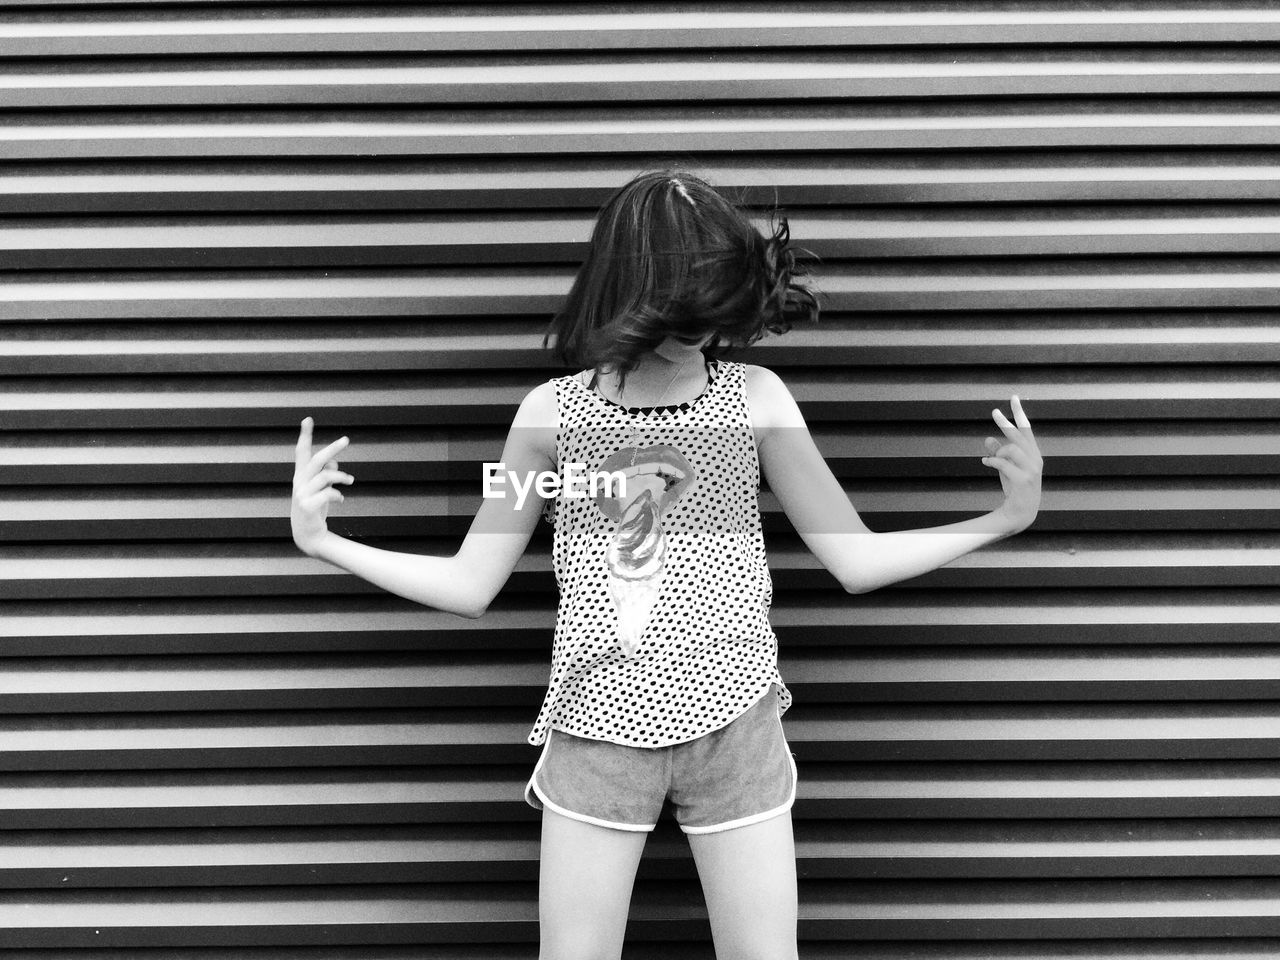 Girl standing against corrugated iron